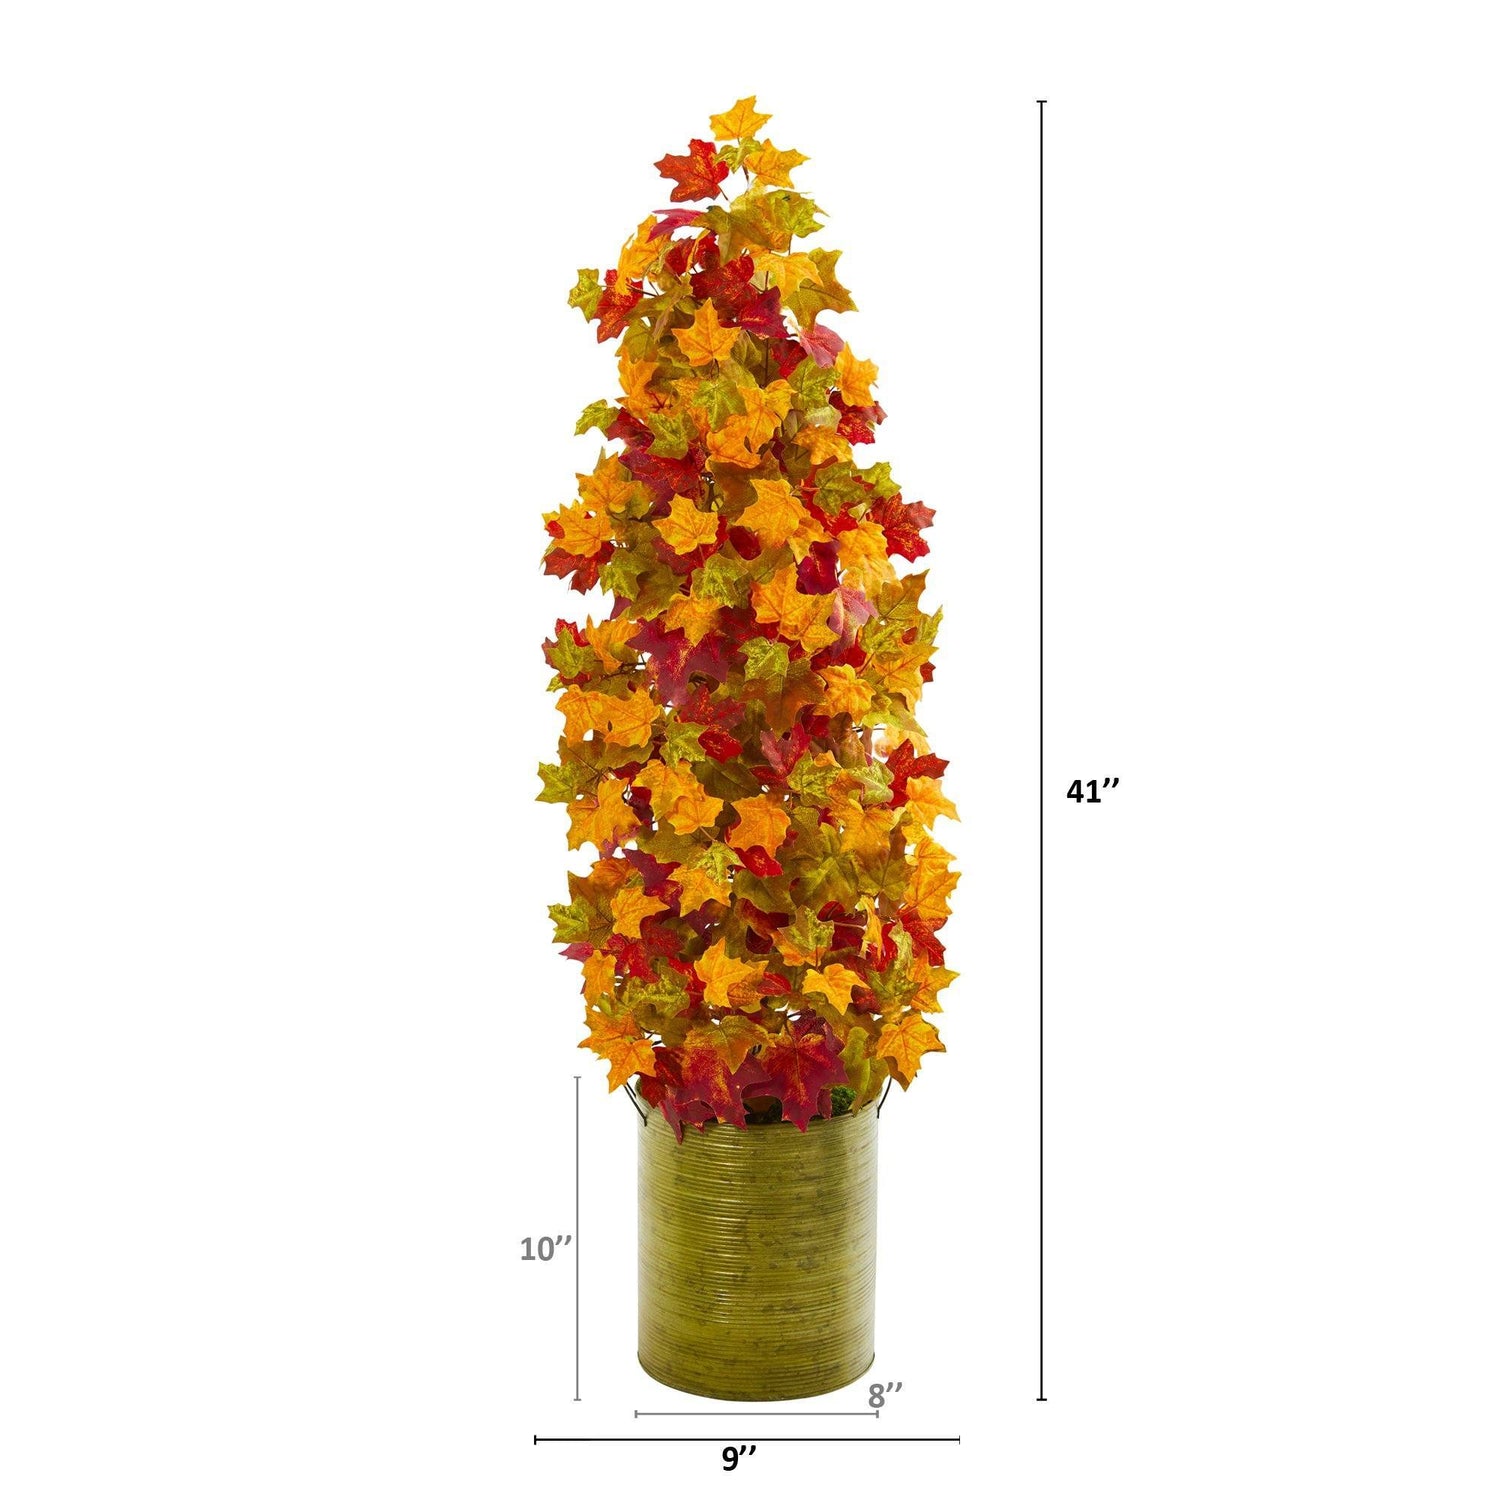 41” Autumn Maple Artificial Tree in Green Metal Planter